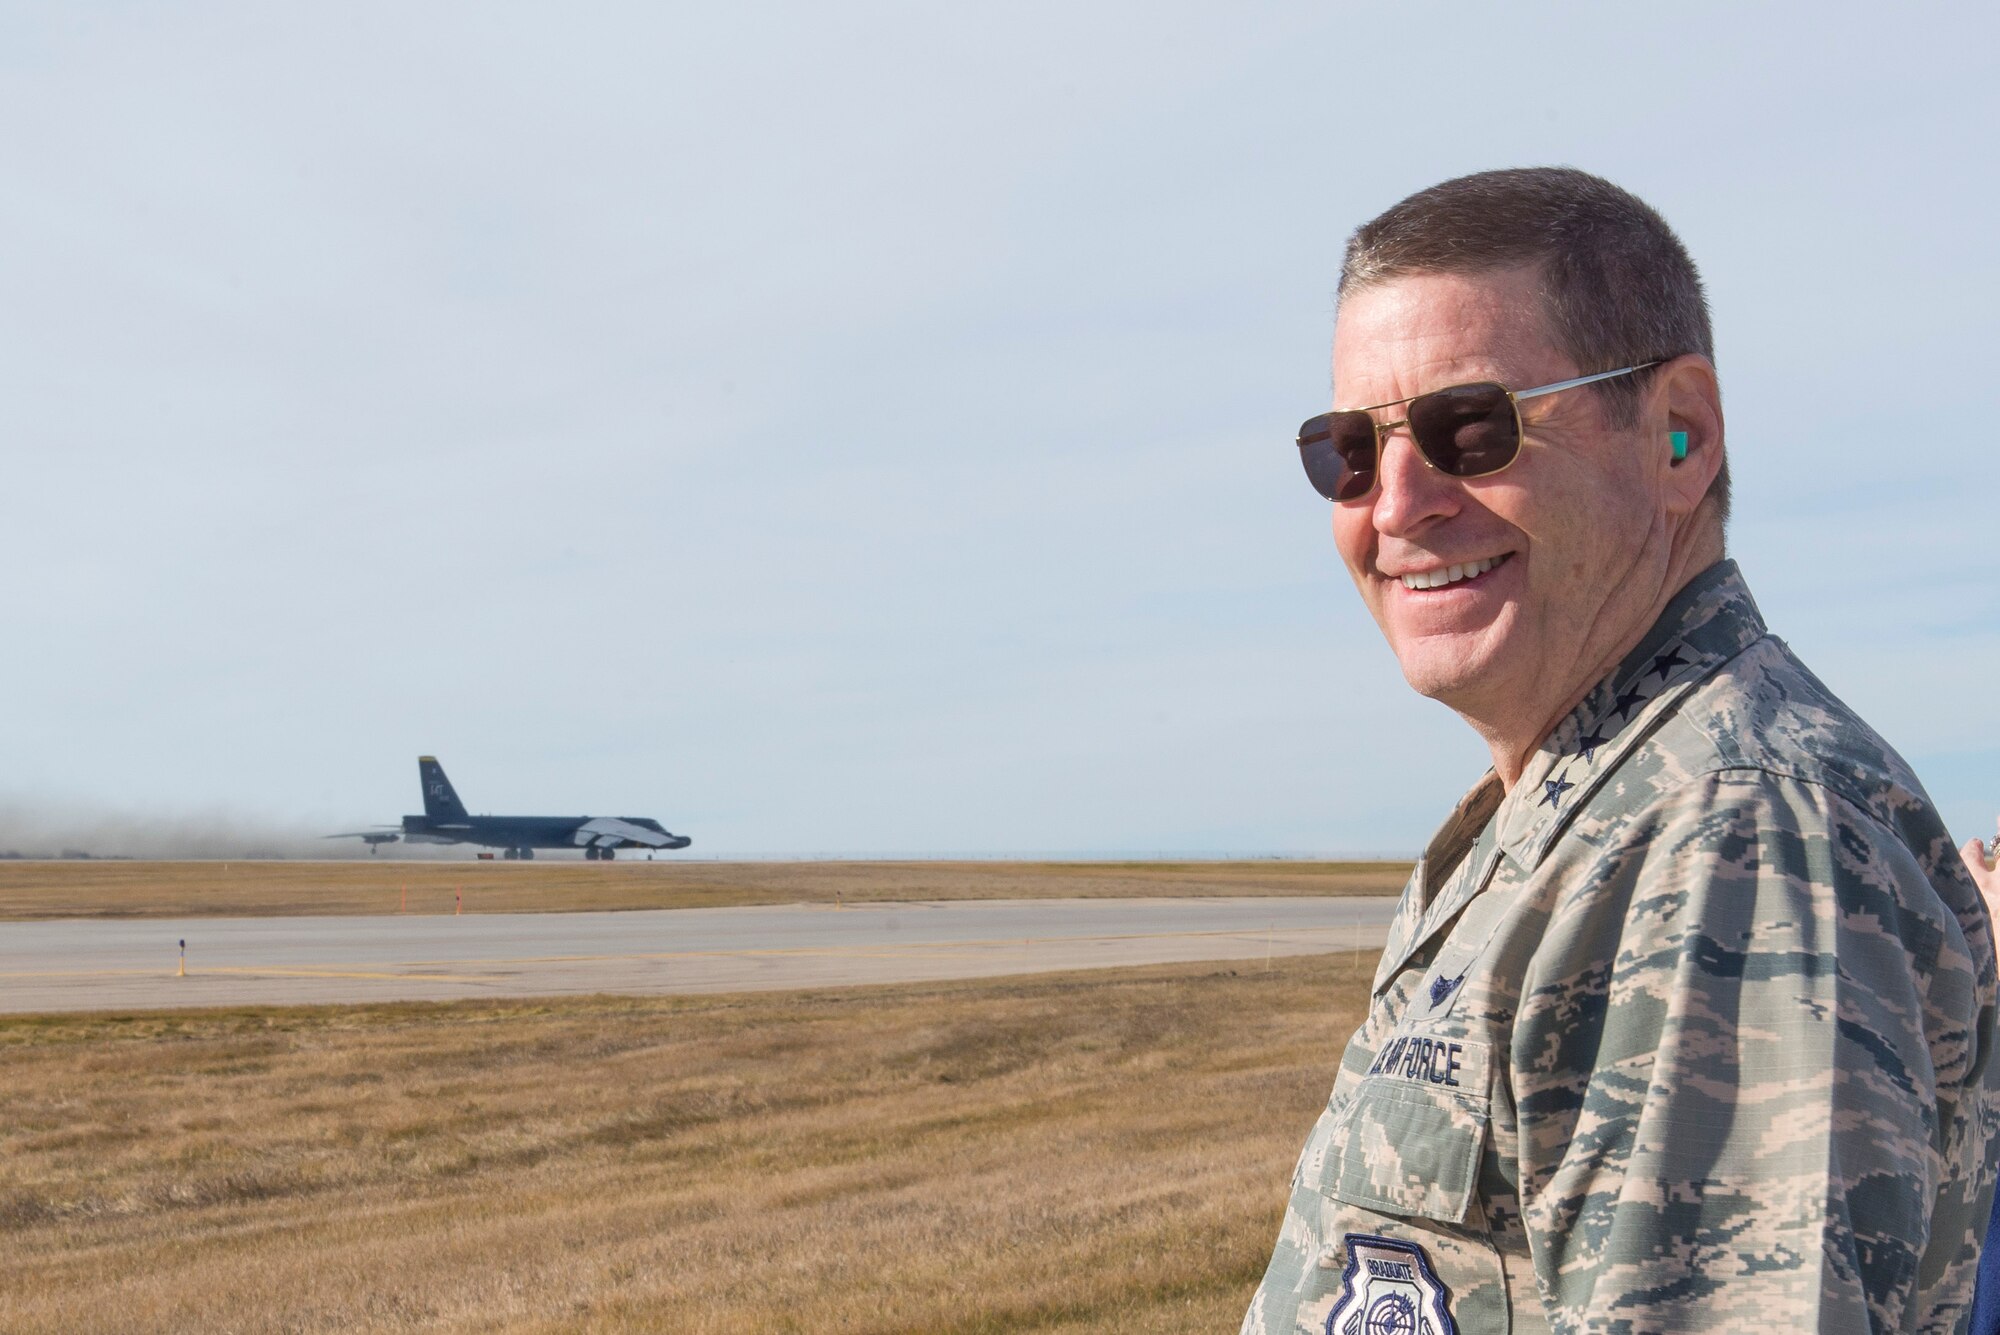 U.S. Air Force Gen. Robin Rand, Air Force Global Strike Command (AFGSC) commander, observes a B-52 Stratofortress bomber taking off from the flight line at Minot Air Force Base, N.D., Nov. 8, 2015, during Exercise GLOBAL THUNDER 16. AFGSC supports USSTRATCOM’s global strike and nuclear deterrence missions by providing strategic assets, including bombers like the B-52 and B-2, to ensure a safe, secure, effective and ready deterrent force. GLOBAL THUNDER is an annual U.S. Strategic Command training event that assesses command and control functionality in all USSTRATCOM mission areas and affords component commands a venue to evaluate their joint operational readiness. Planning for GLOBAL THUNDER 16 has been underway for more than a year and is based on a notional scenario with fictitious adversaries. One of nine DoD unified combatant commands, USSTRATCOM has global strategic missions, assigned through the Unified Command Plan, which also include; space operations; cyberspace operations; joint electronic warfare; missile defense; intelligence, surveillance and reconnaissance; combating weapons of mass destruction; and analysis and targeting. (U.S. Air Force photo by Airman 1st Class Justin Armstong)